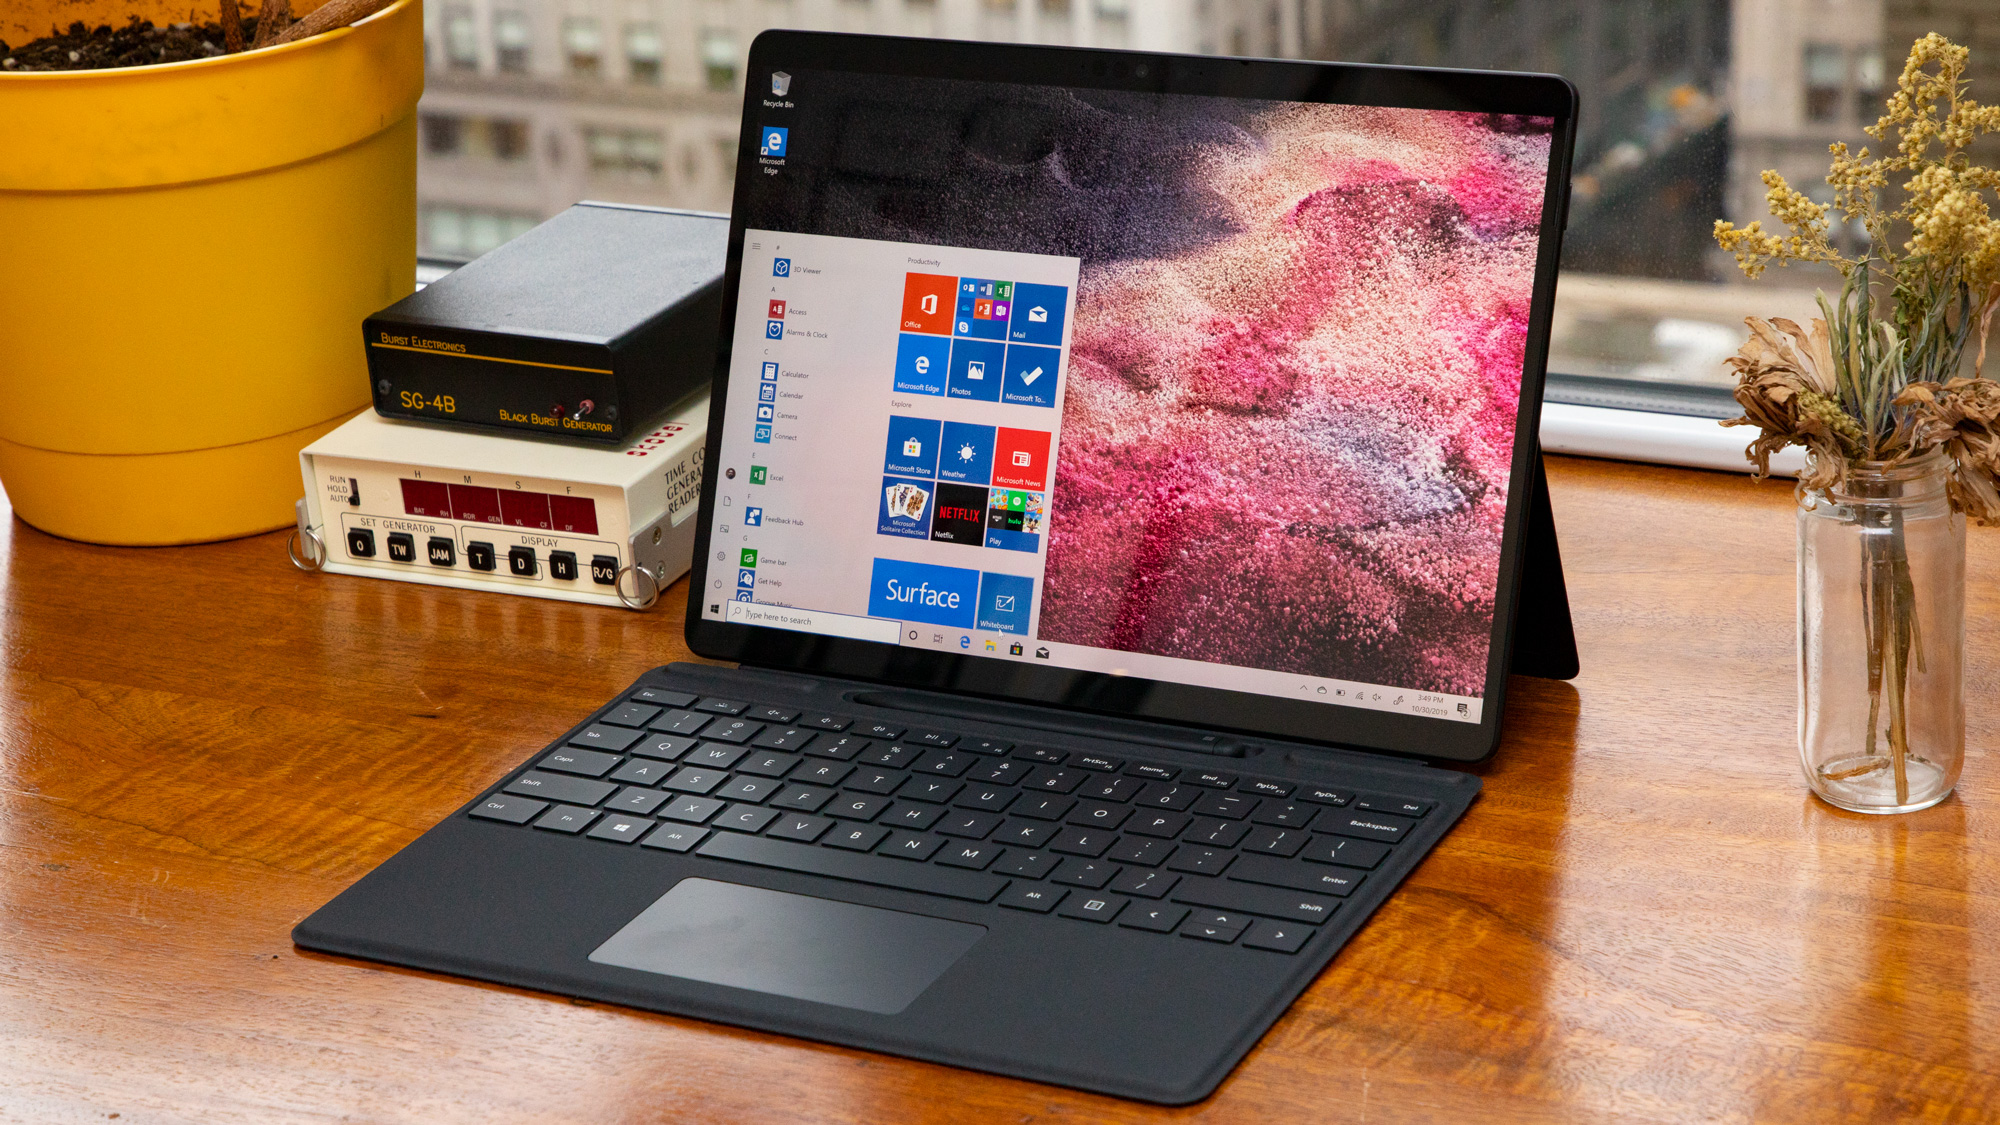 Windows 10 May 2020 Update finally arrives on Surface Pro X and other Microsoft devices